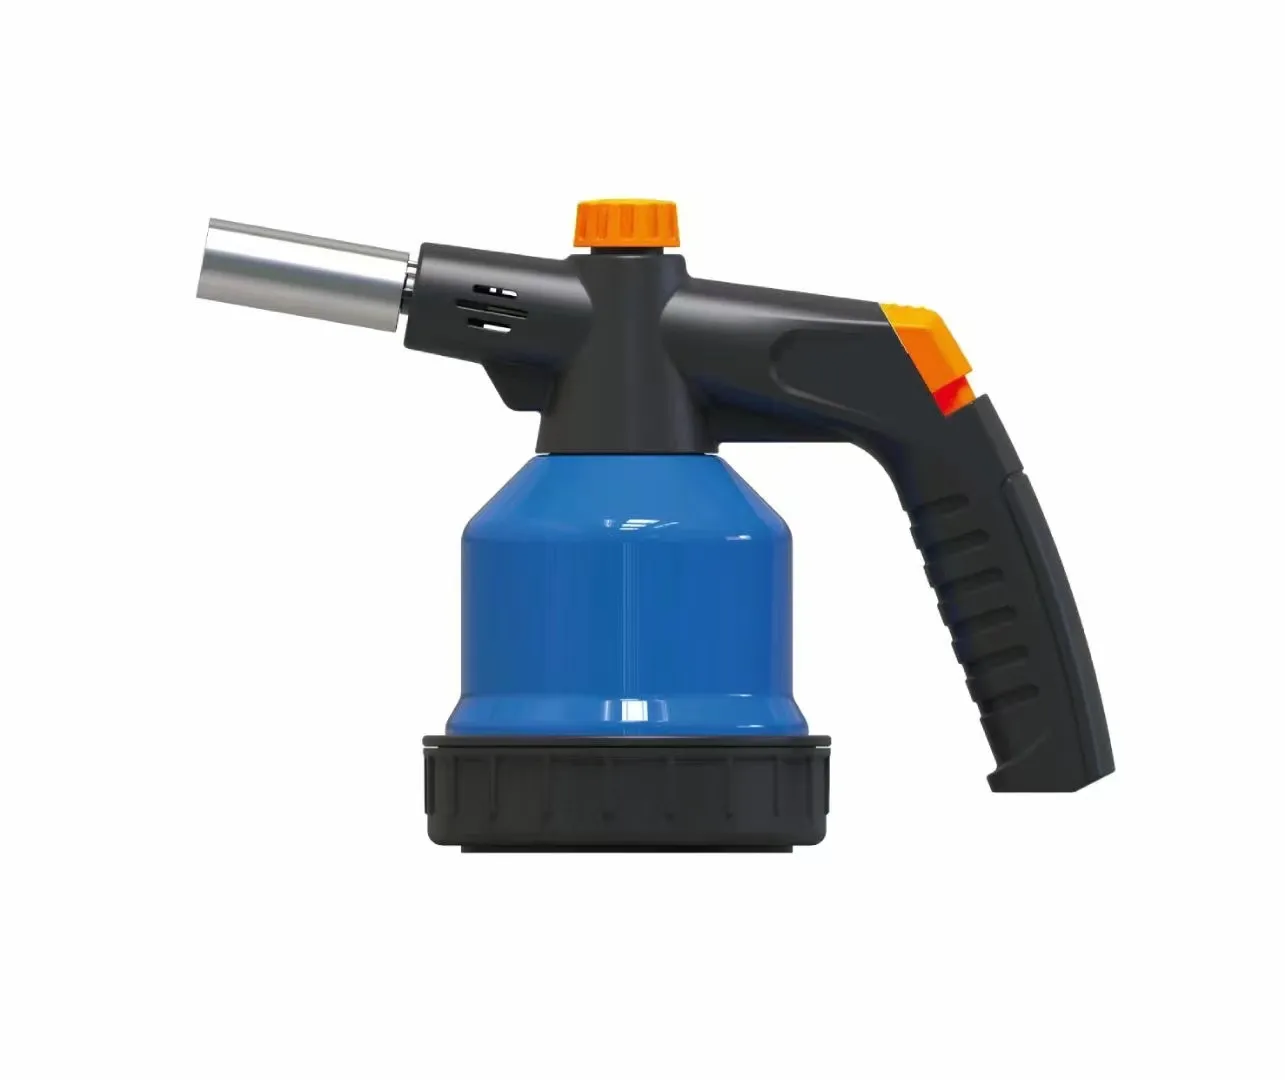 Portable butane blow torch for camping,Featuring a flame control button with a high-quality brass burn tip.